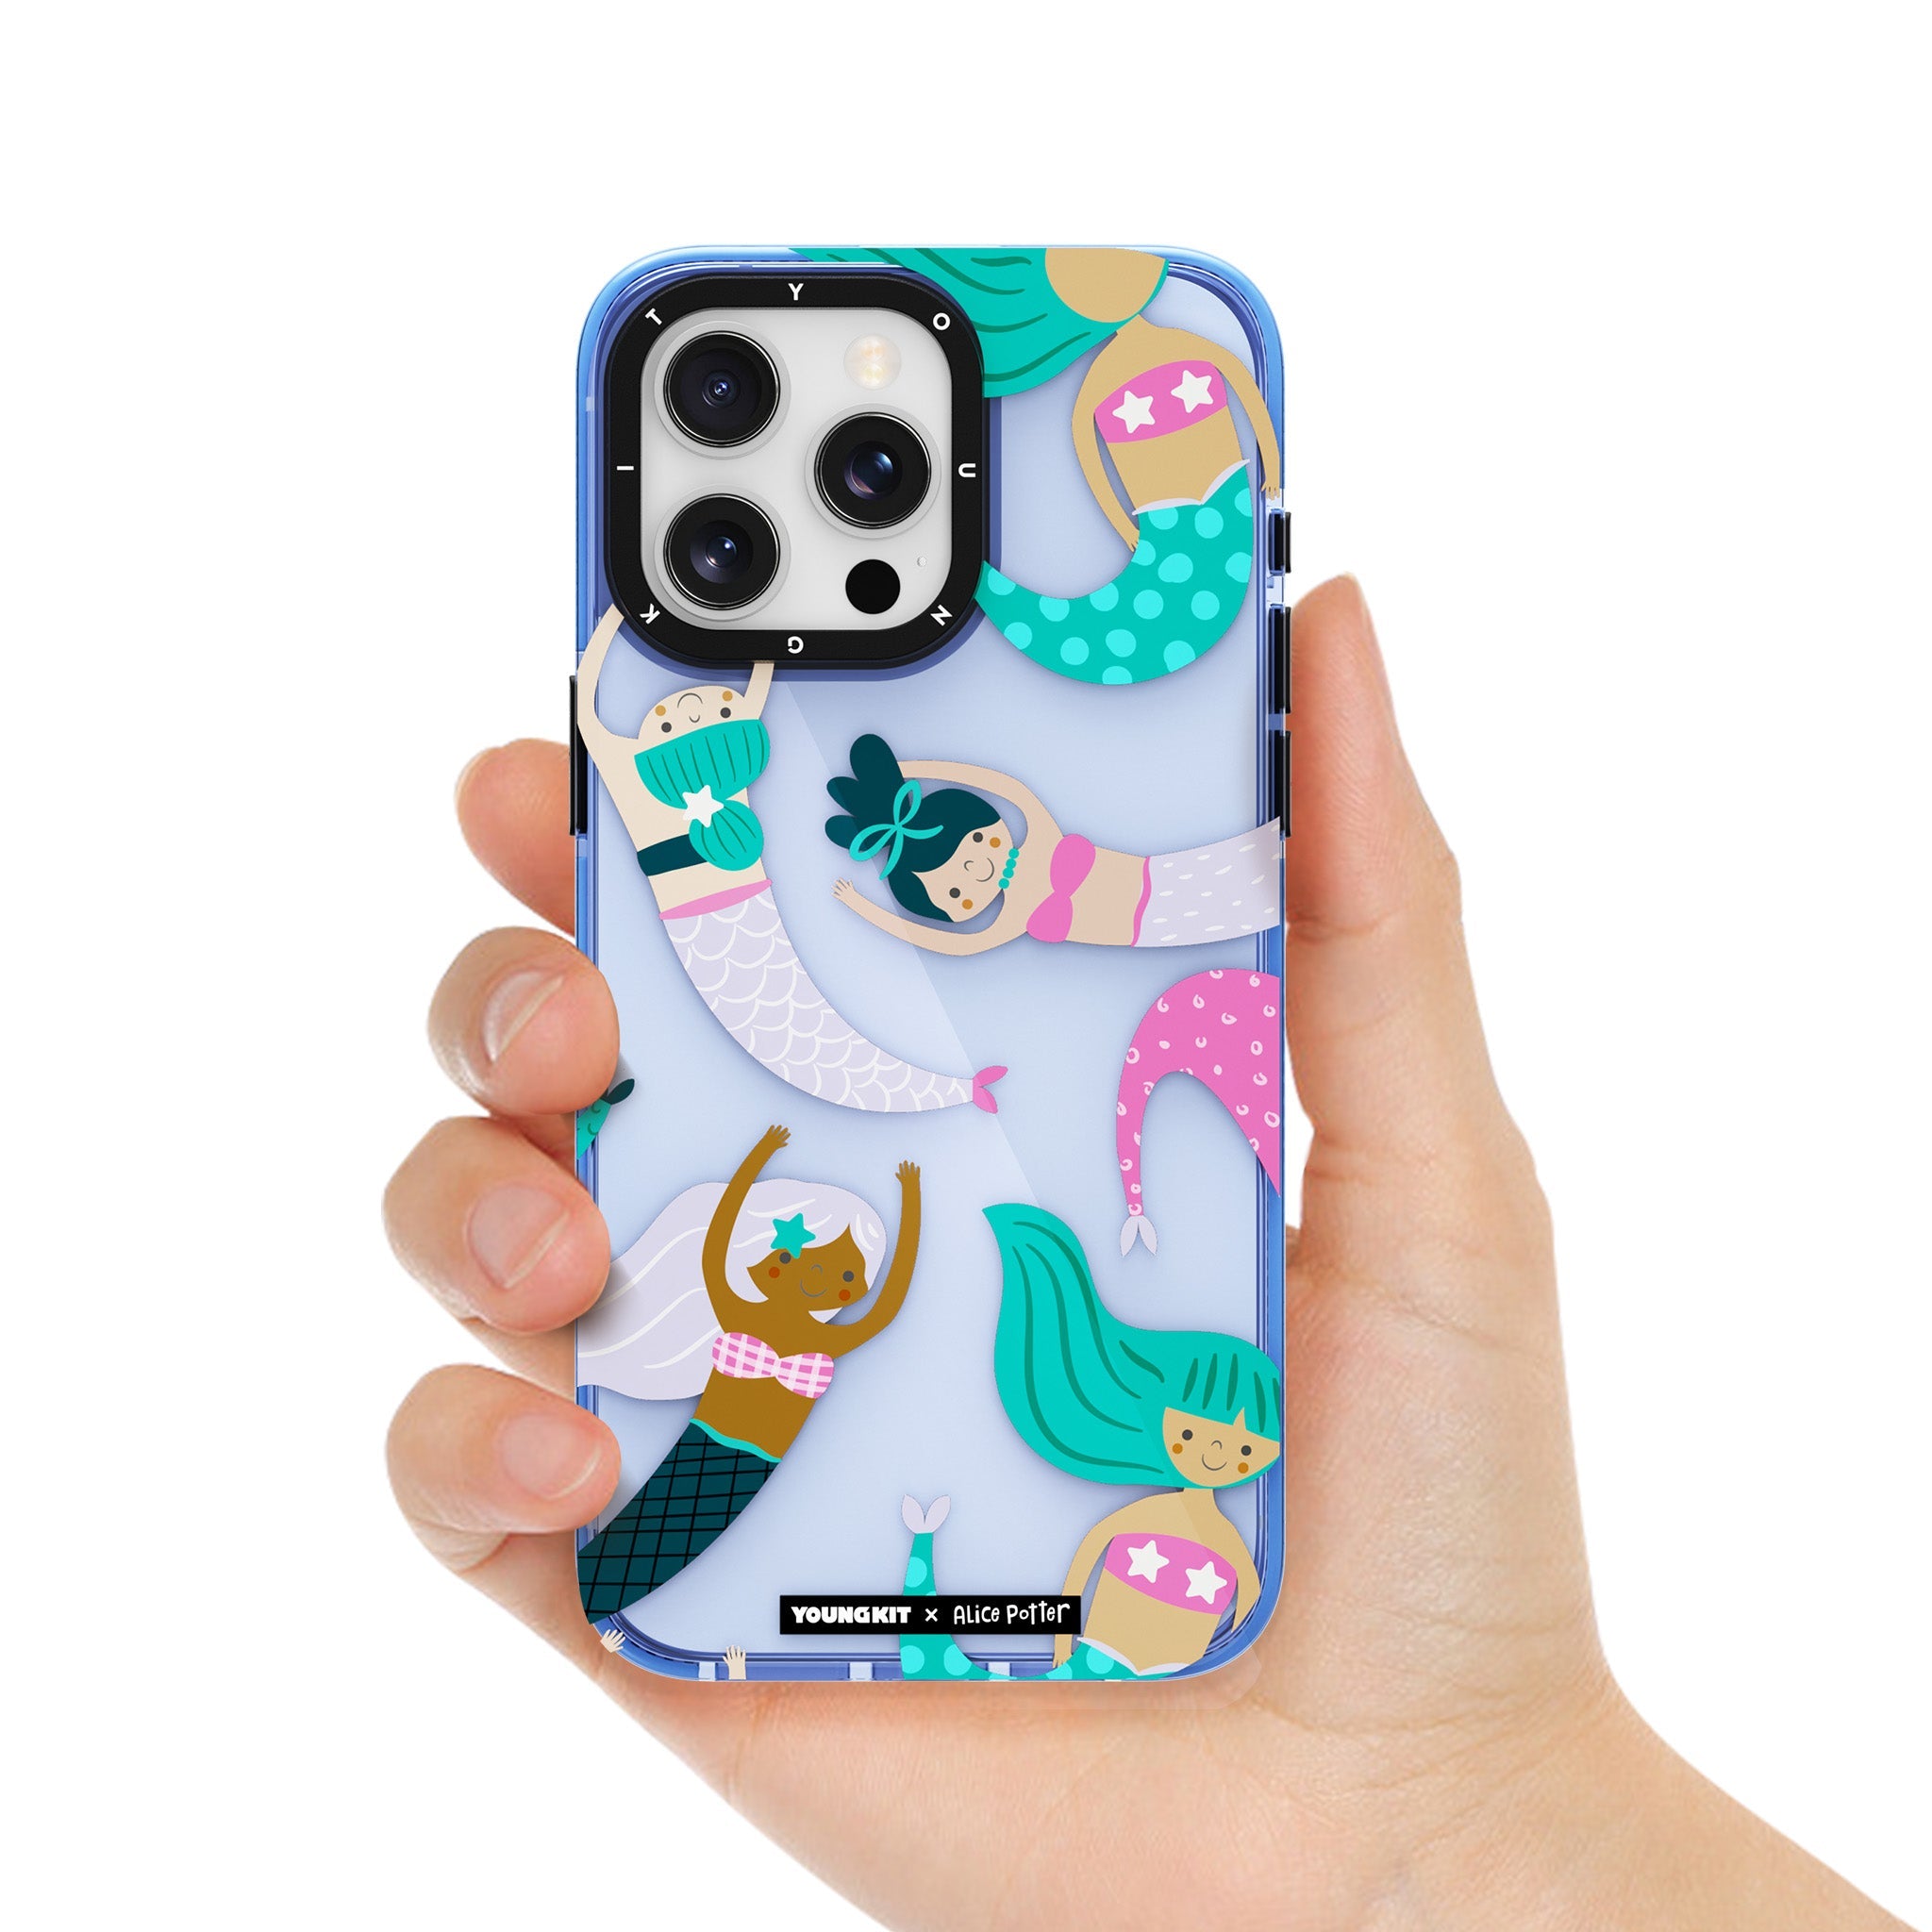 YOUNGKIT X Alice Potter iPhone15 Case-Colorful Zoo